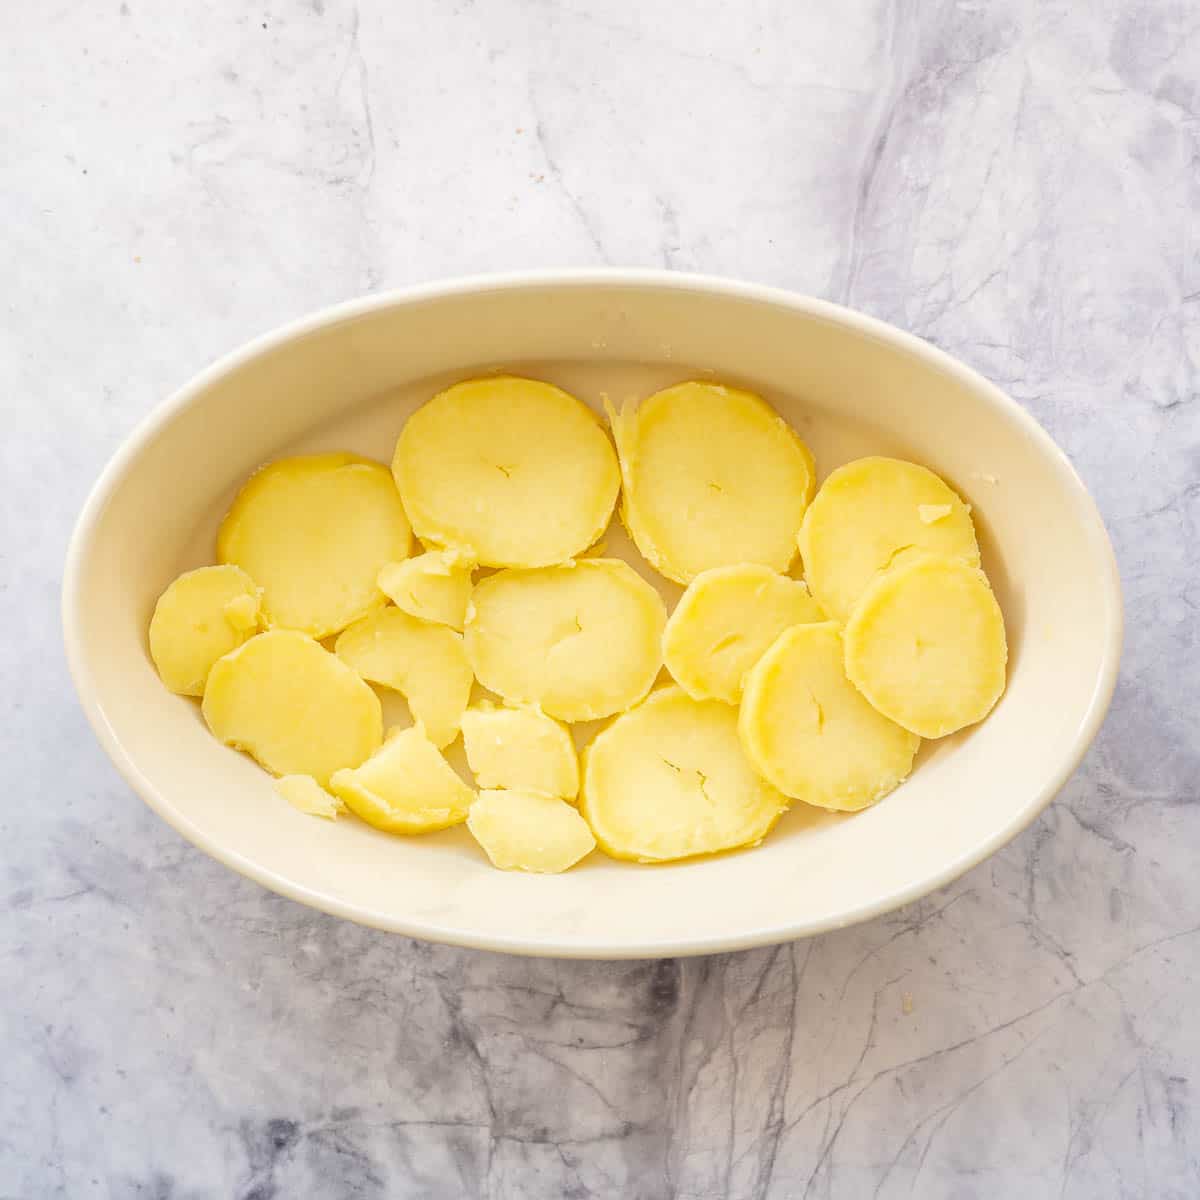 Slices of cooked potato in the bottom of an oval baking dish.